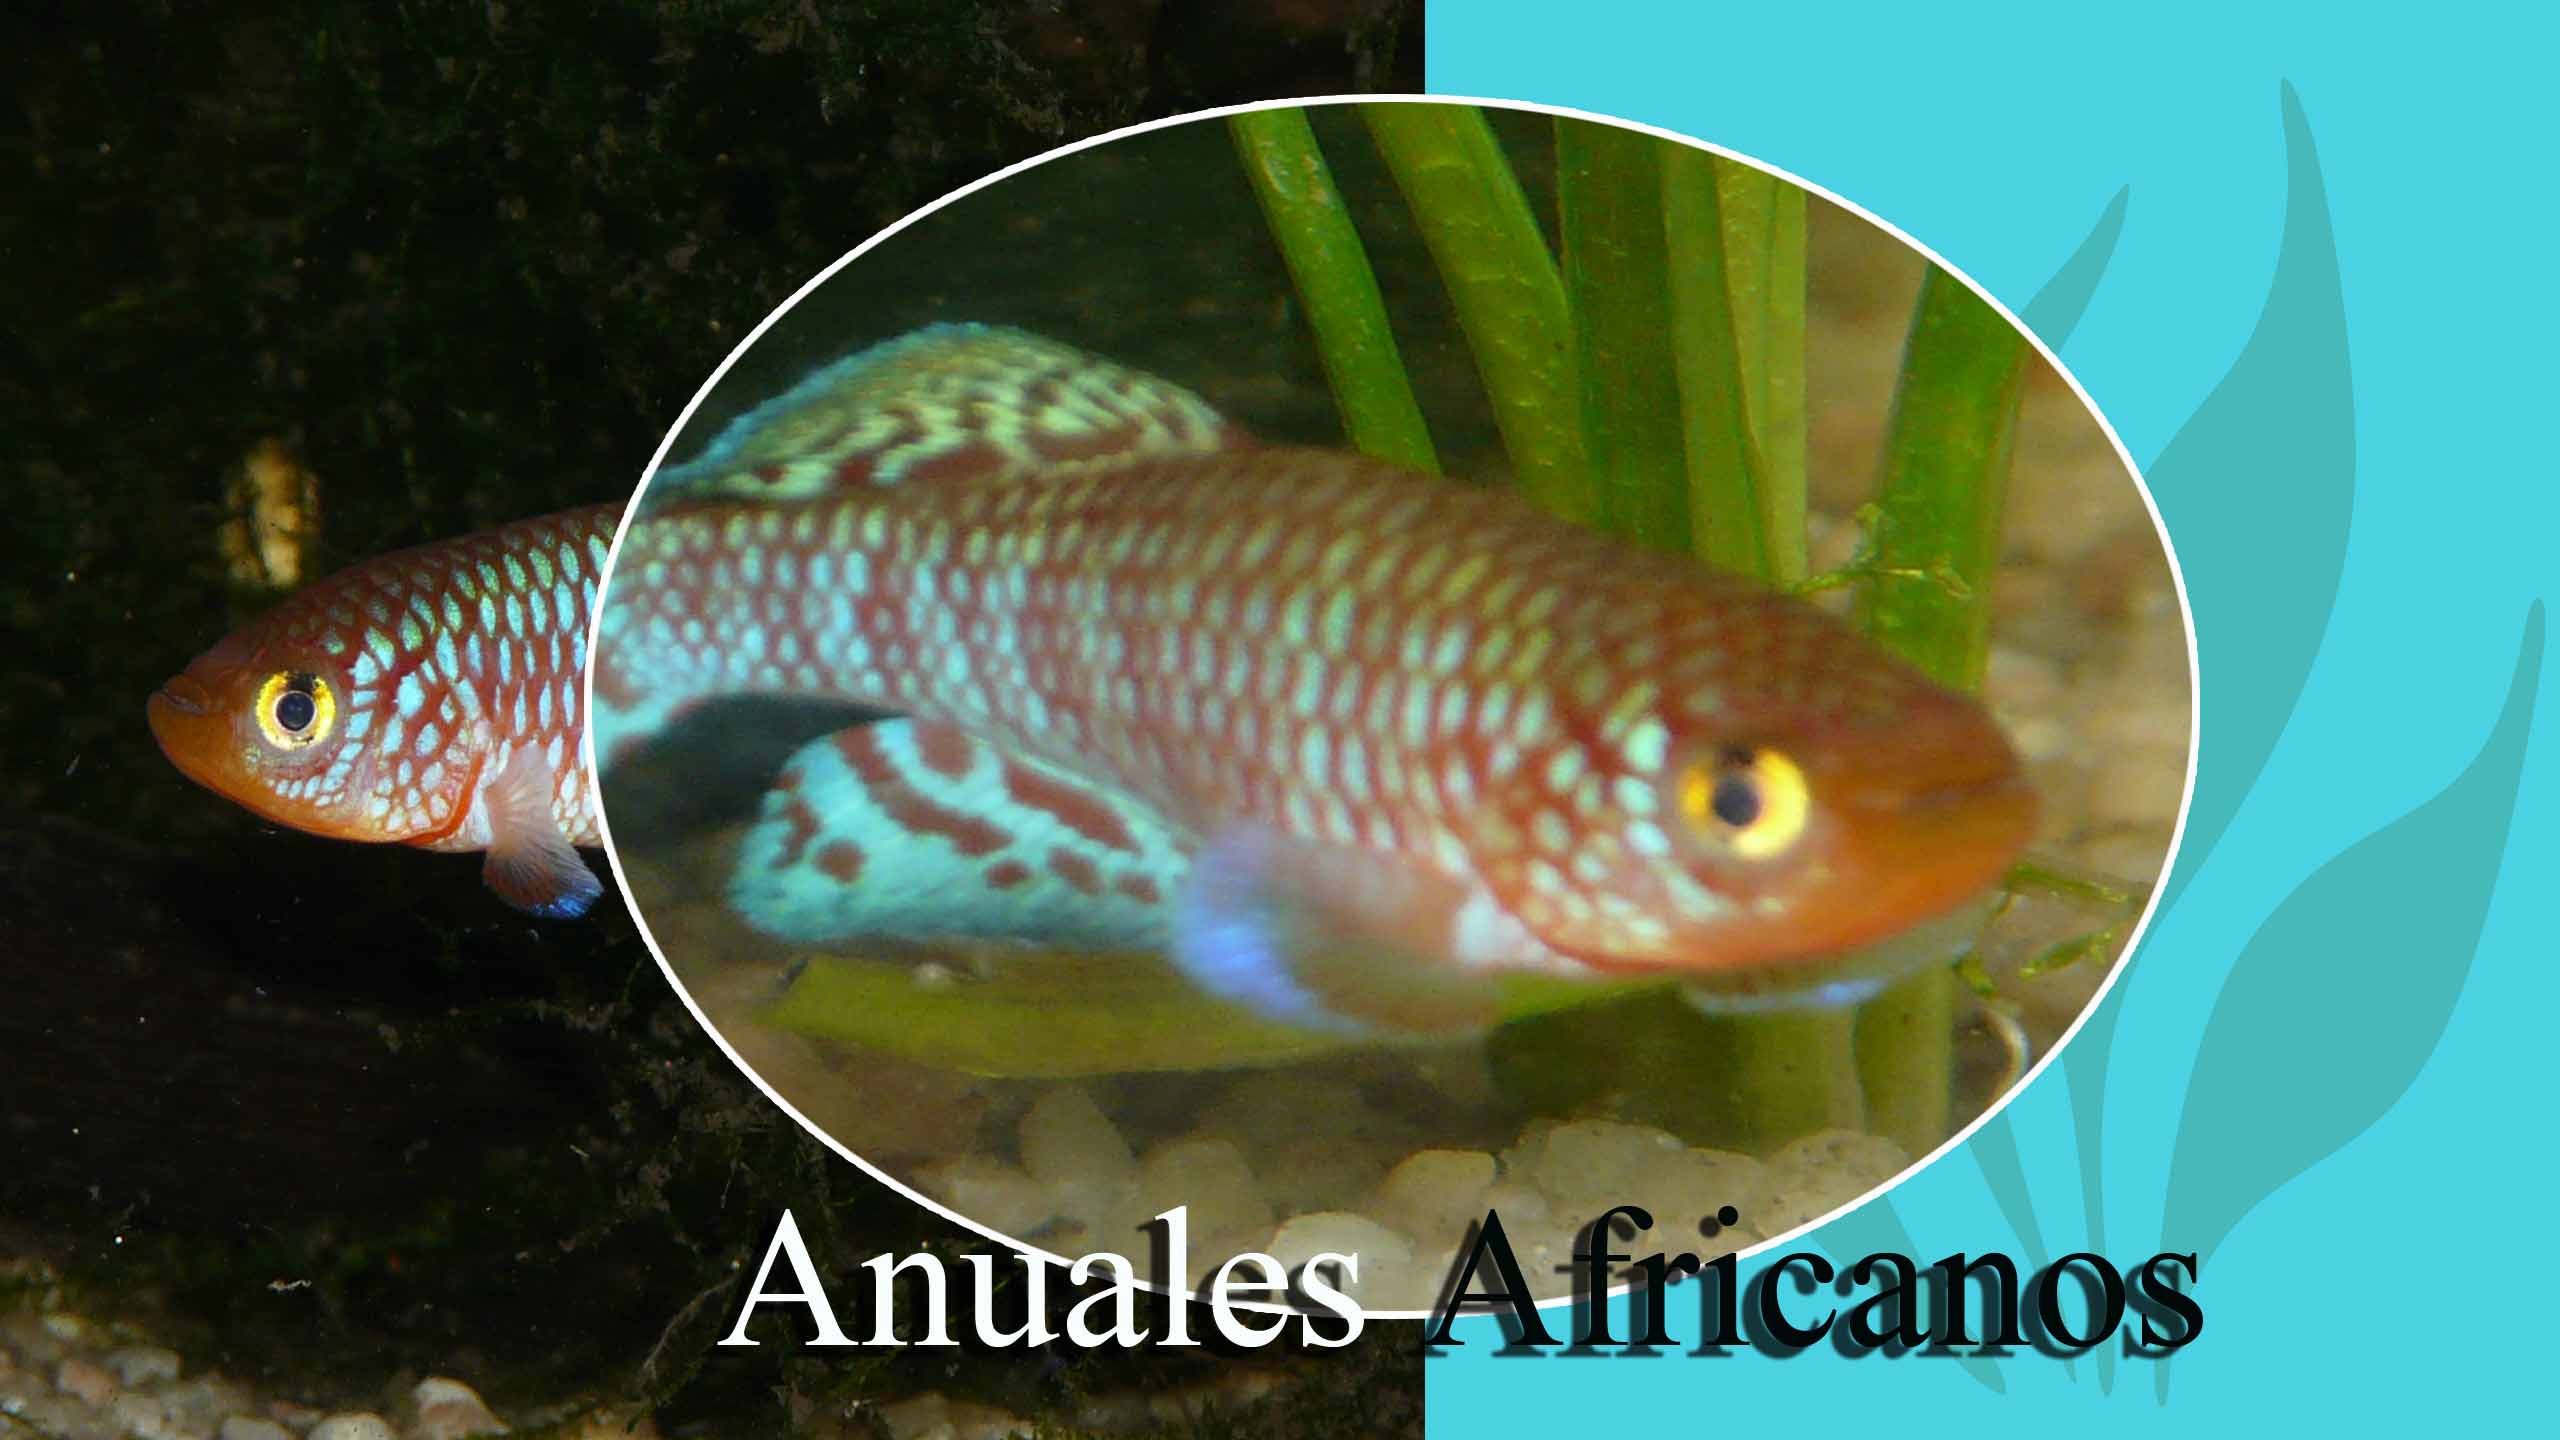 anuales africanos